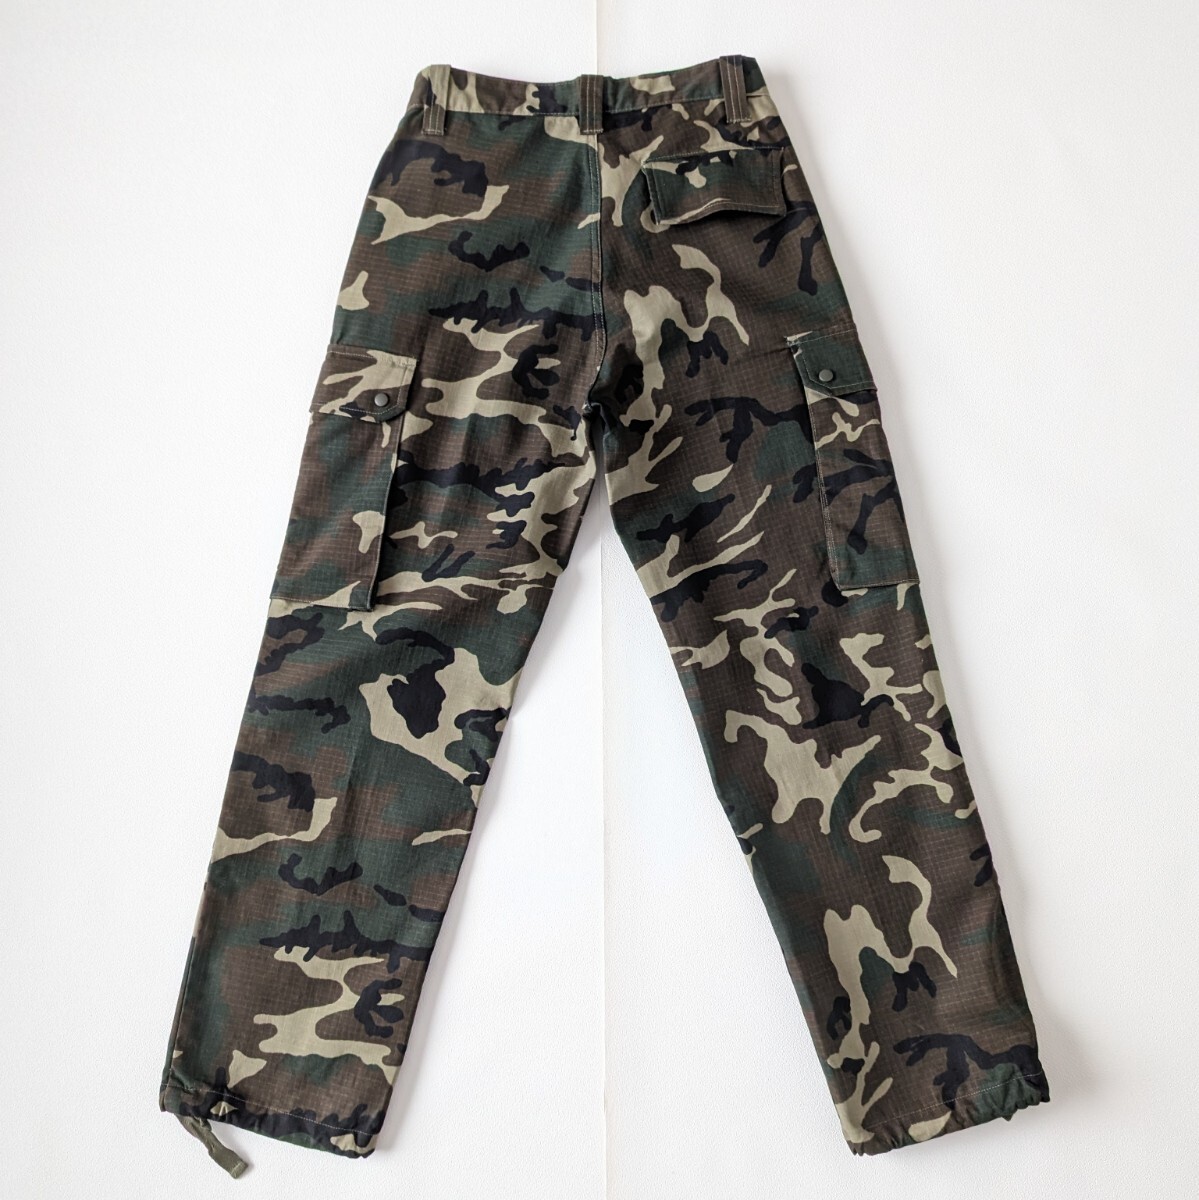  Spain army wood camouflage pattern / camouflage pattern military cargo pants old clothes /W31L28[L1052]